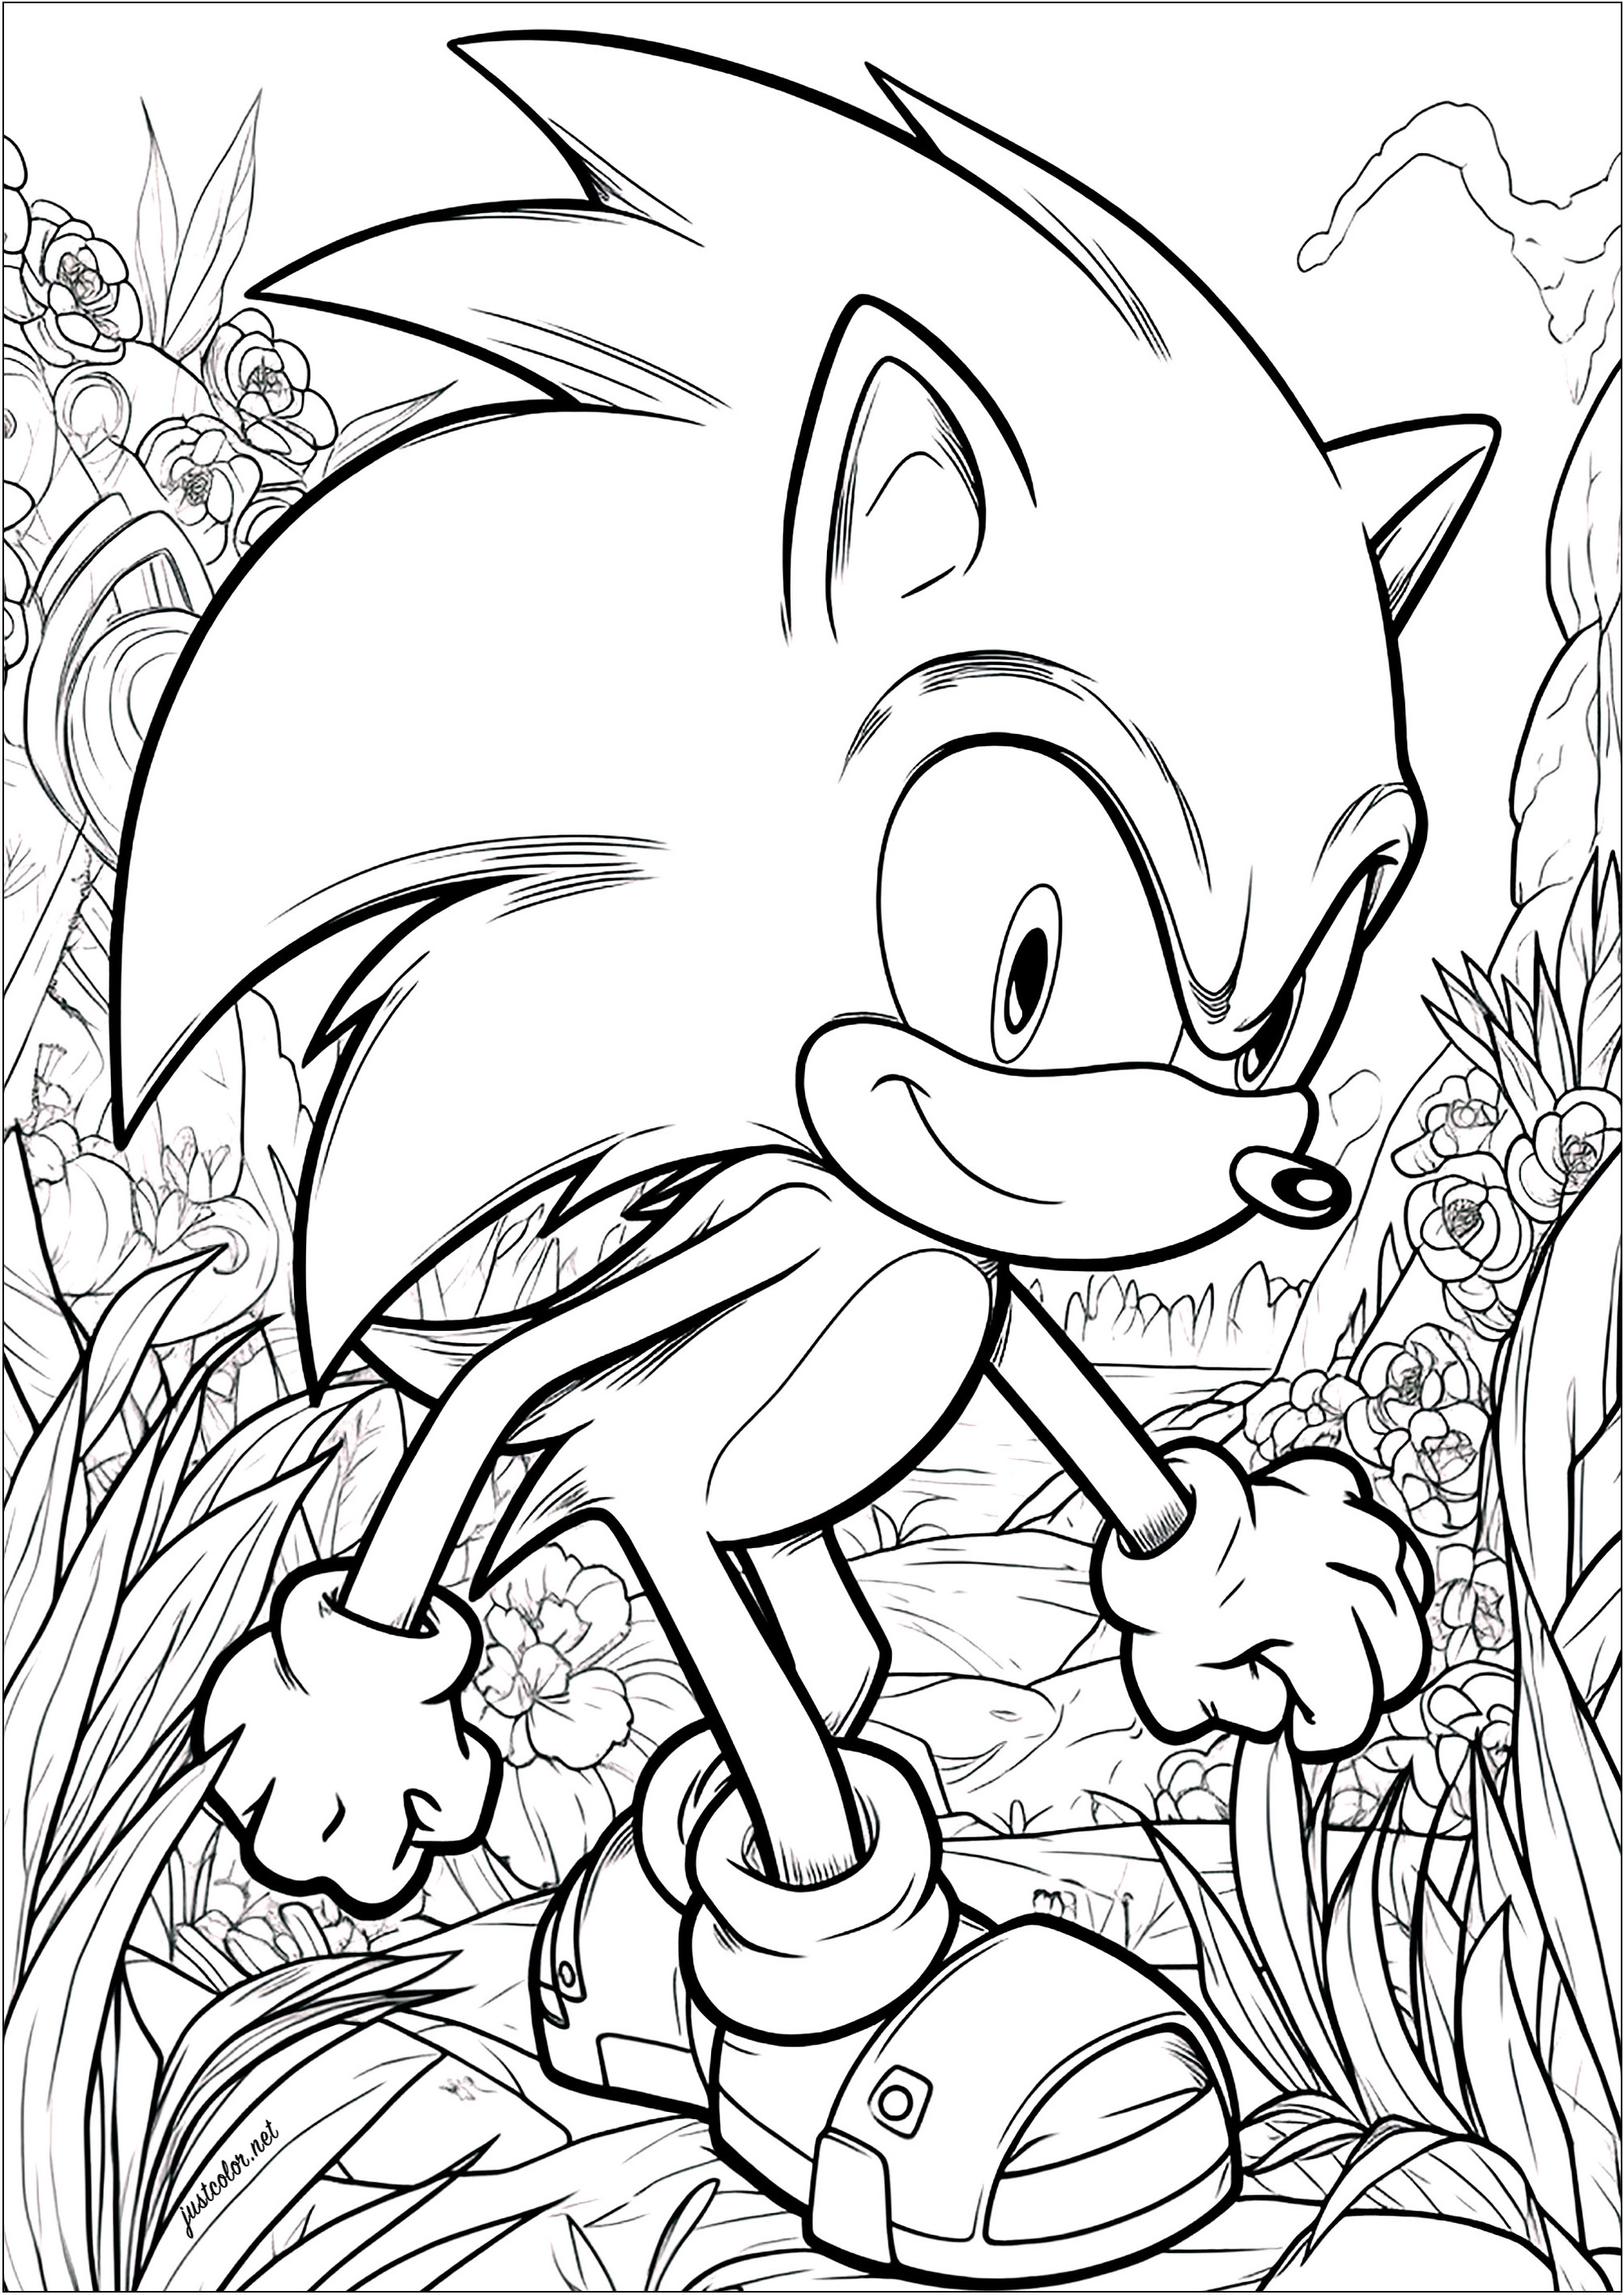 Complex coloring of Sonic, with floral background